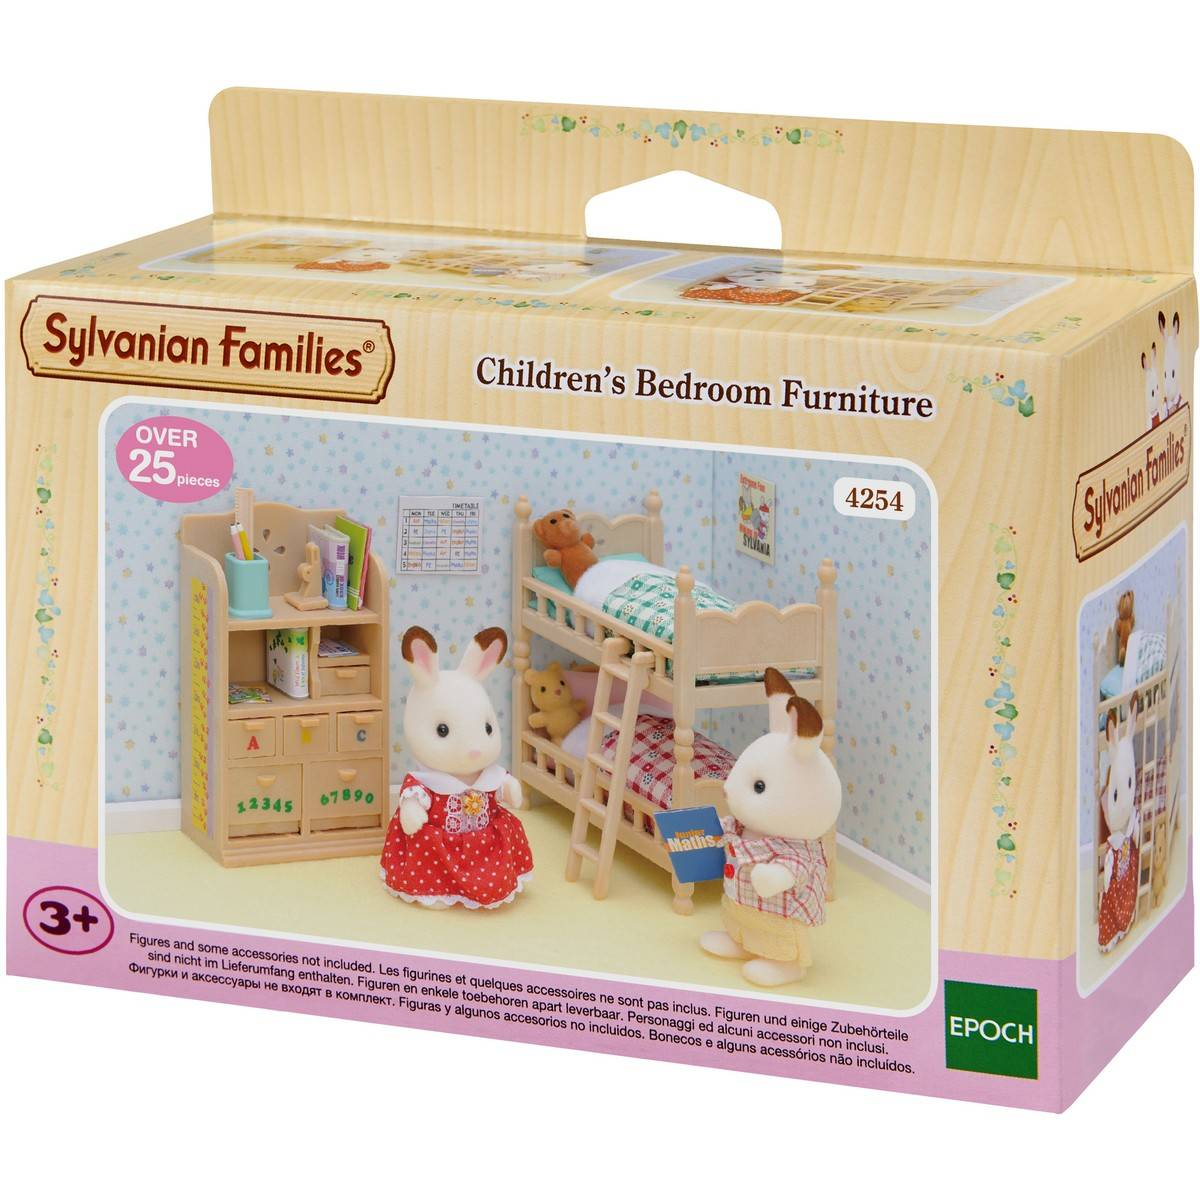 Sylvanian Families Childrens Bedroom Furniture Set with regard to size 1200 X 1200